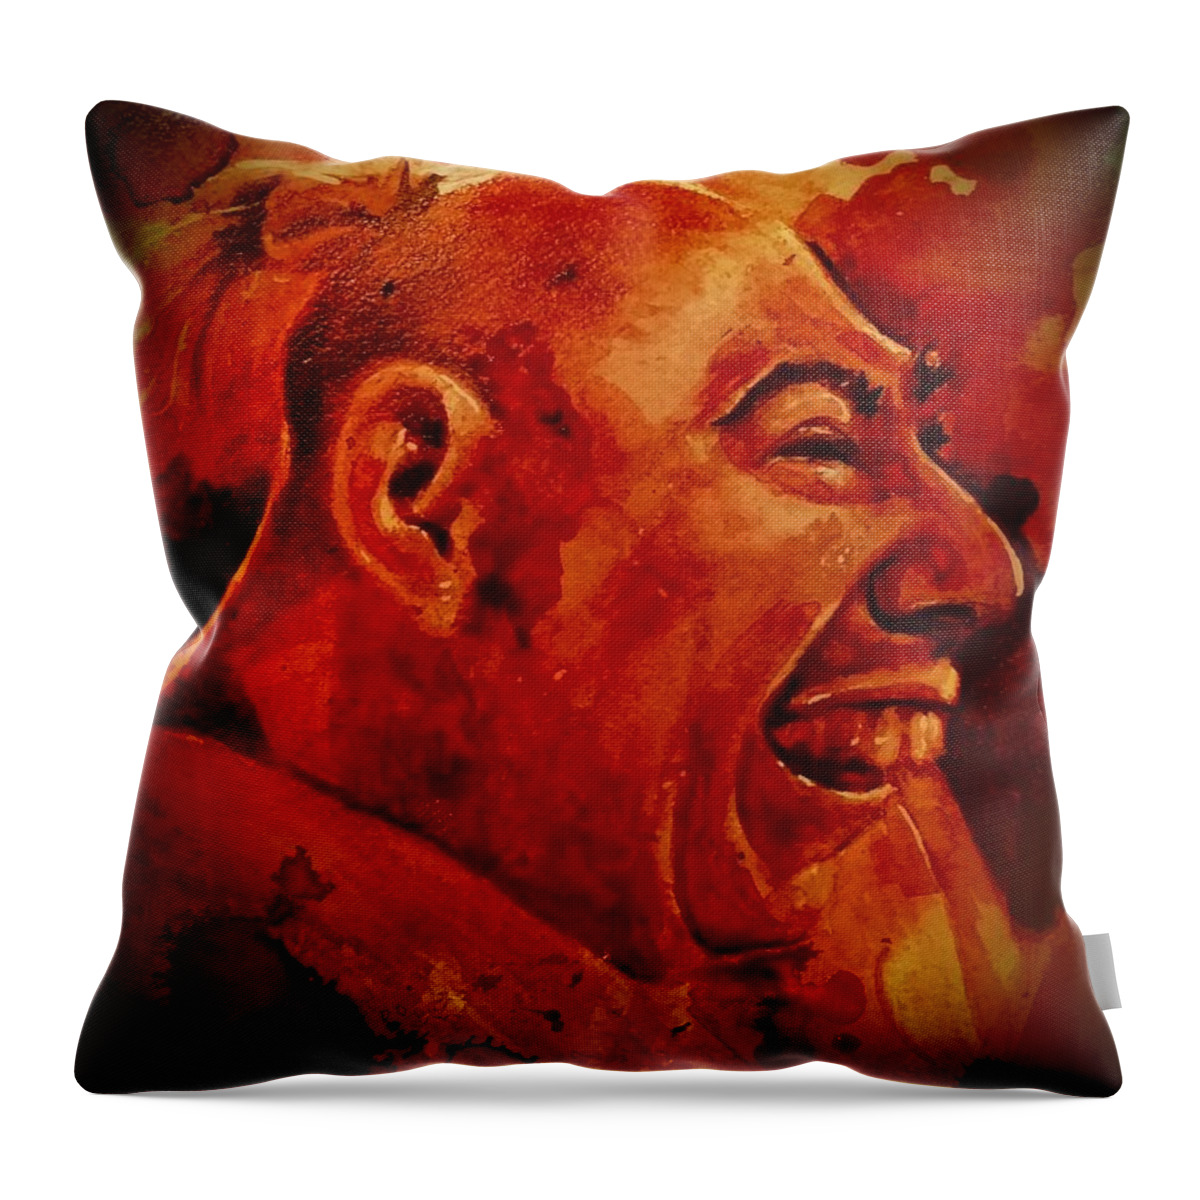 Schlitzie Throw Pillow featuring the painting Schlitzie / Pinhead by Ryan Almighty